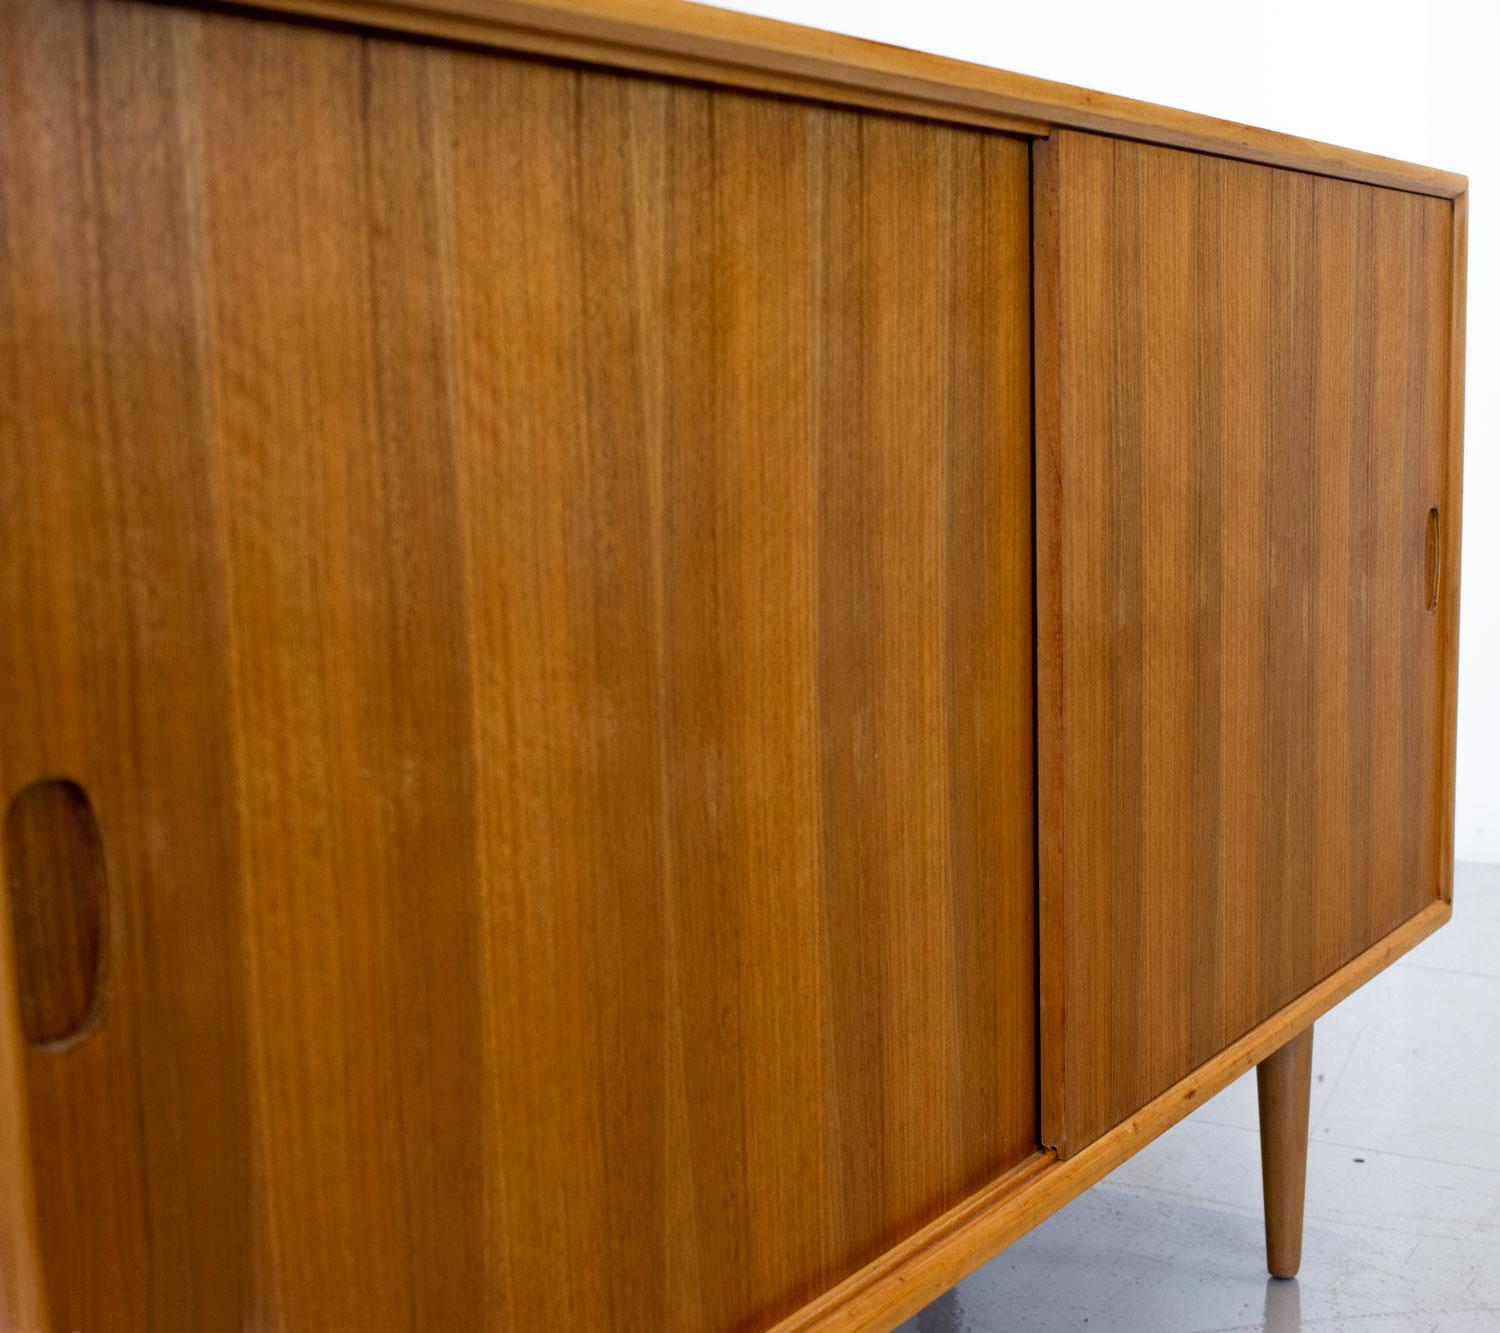 Varnished English Mid-Century Walnut Sideboard by Heals, 1960s For Sale